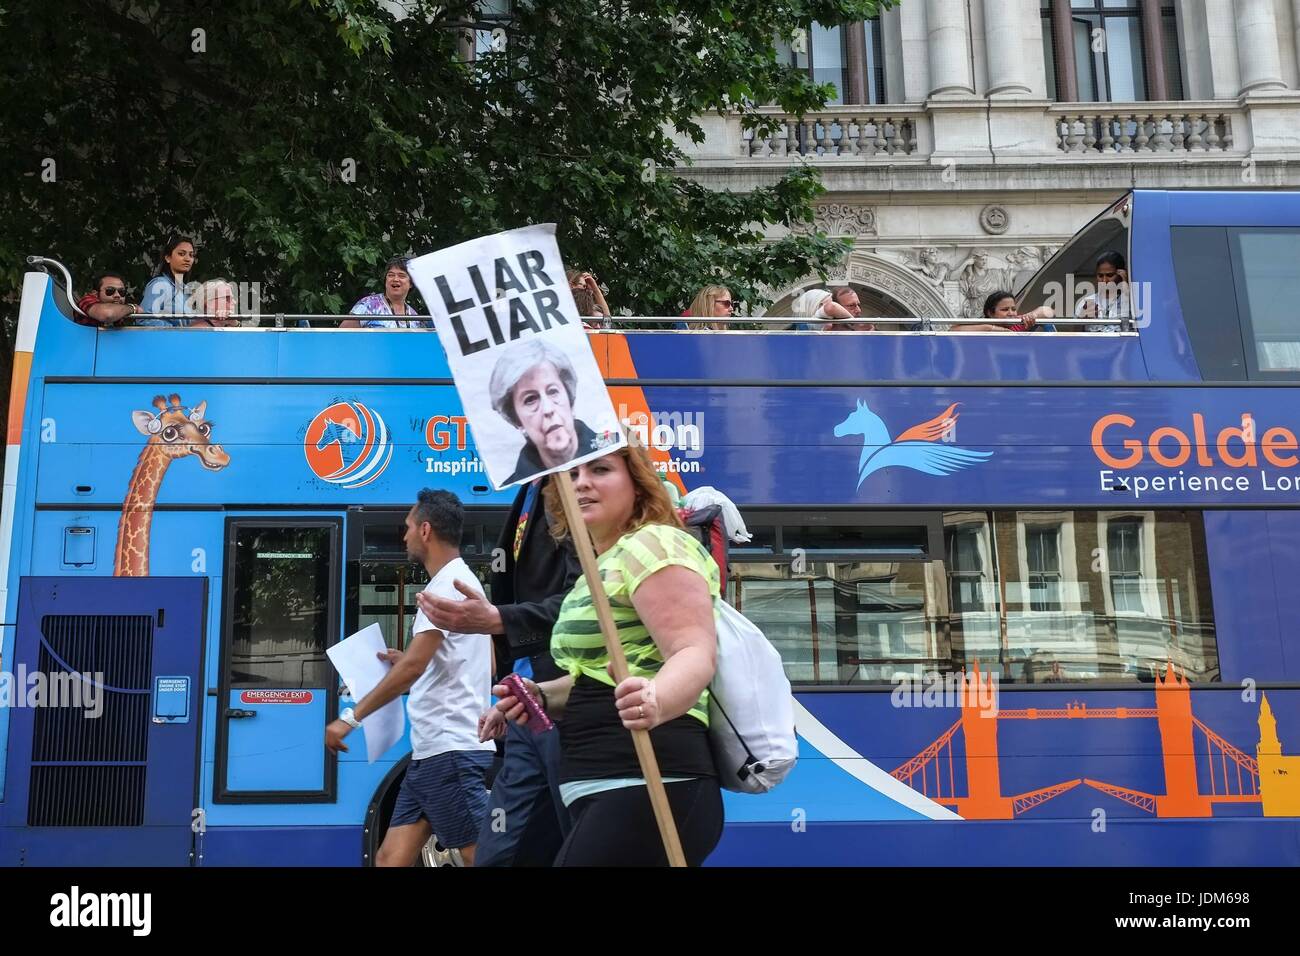 London, UK. 21st June, 2017. Marching towards Parliament.Day of Rage protesters march from Shepards Bush to Parliament demanding justice for the victims of the Grenfell Tower fire and Theresa Mays resignation. :Credit claire doherty Alamy/Live News. Stock Photo